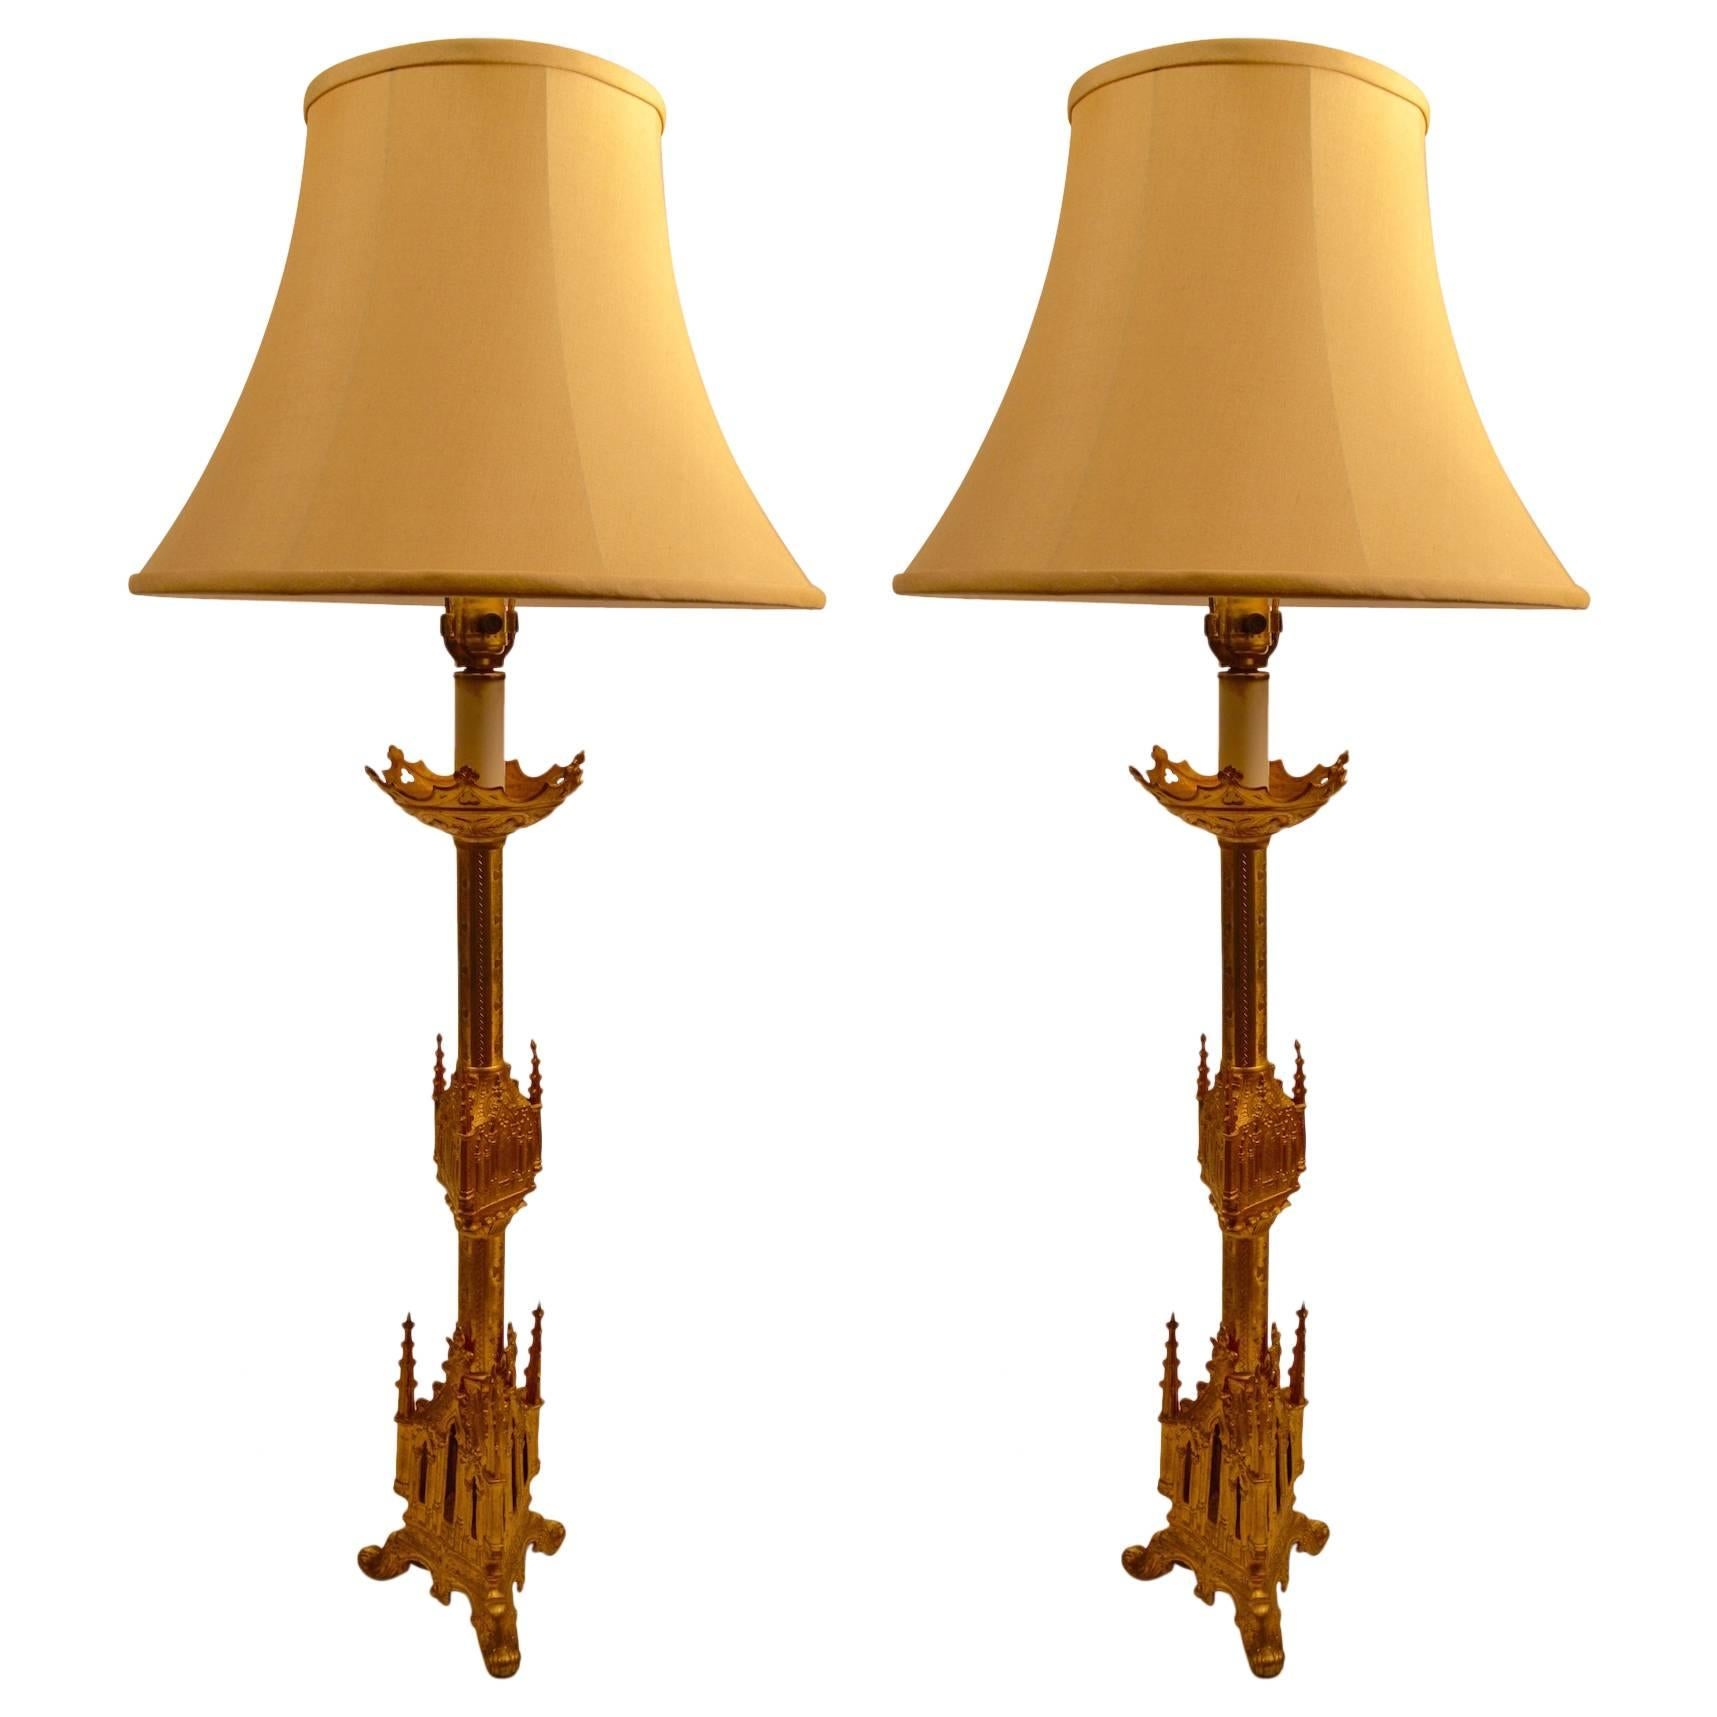 Pair of Gothic Revival Pricket Lamps